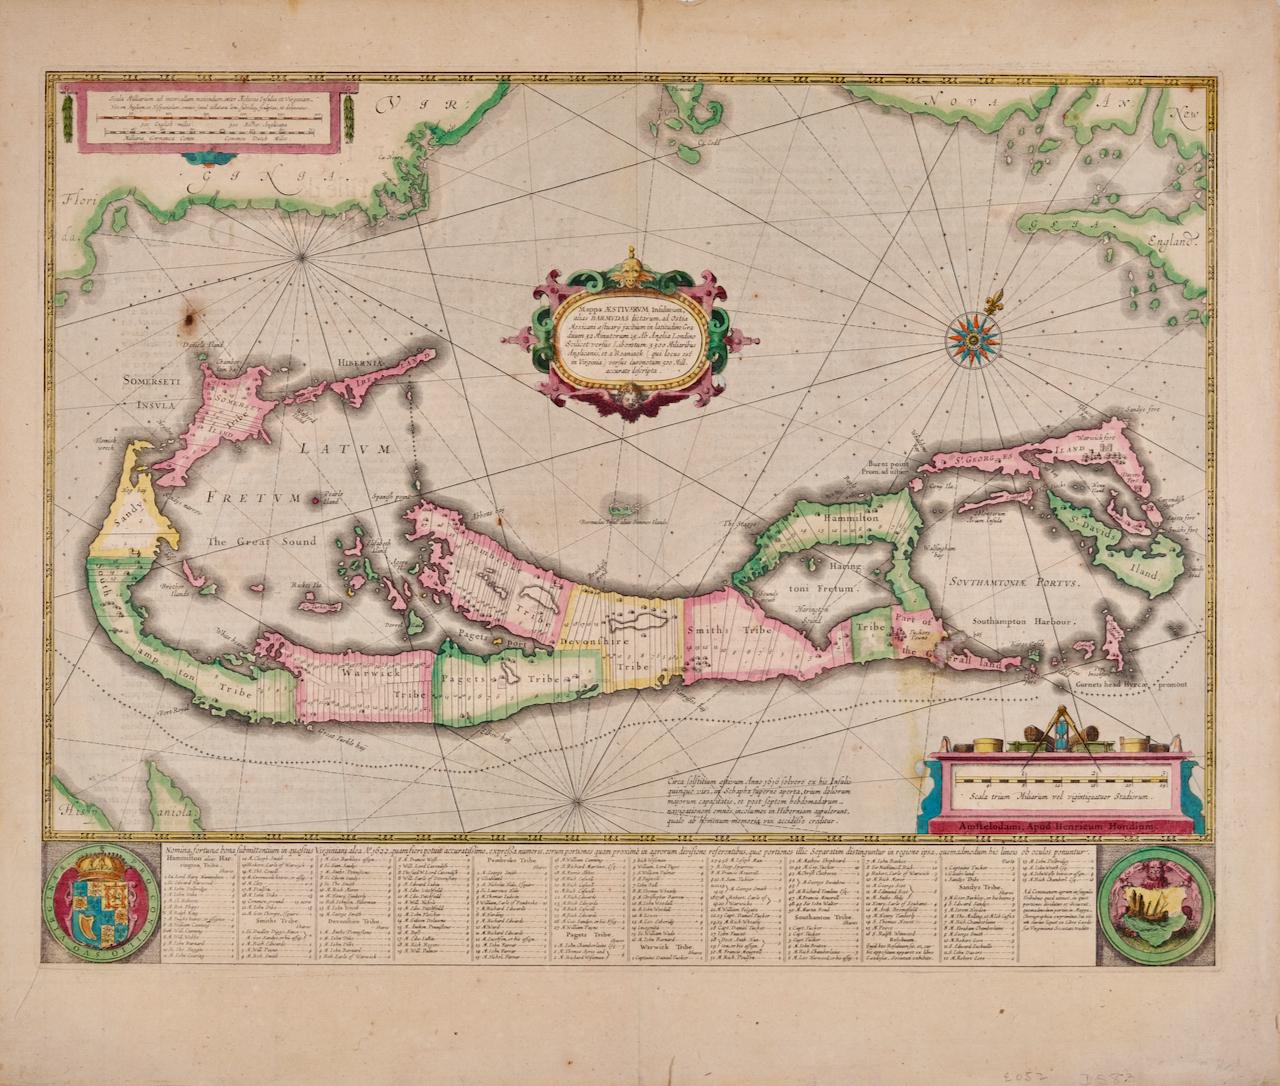  Bermuda: An Early 17th Century Hand-colored Map by Henricus Hondius